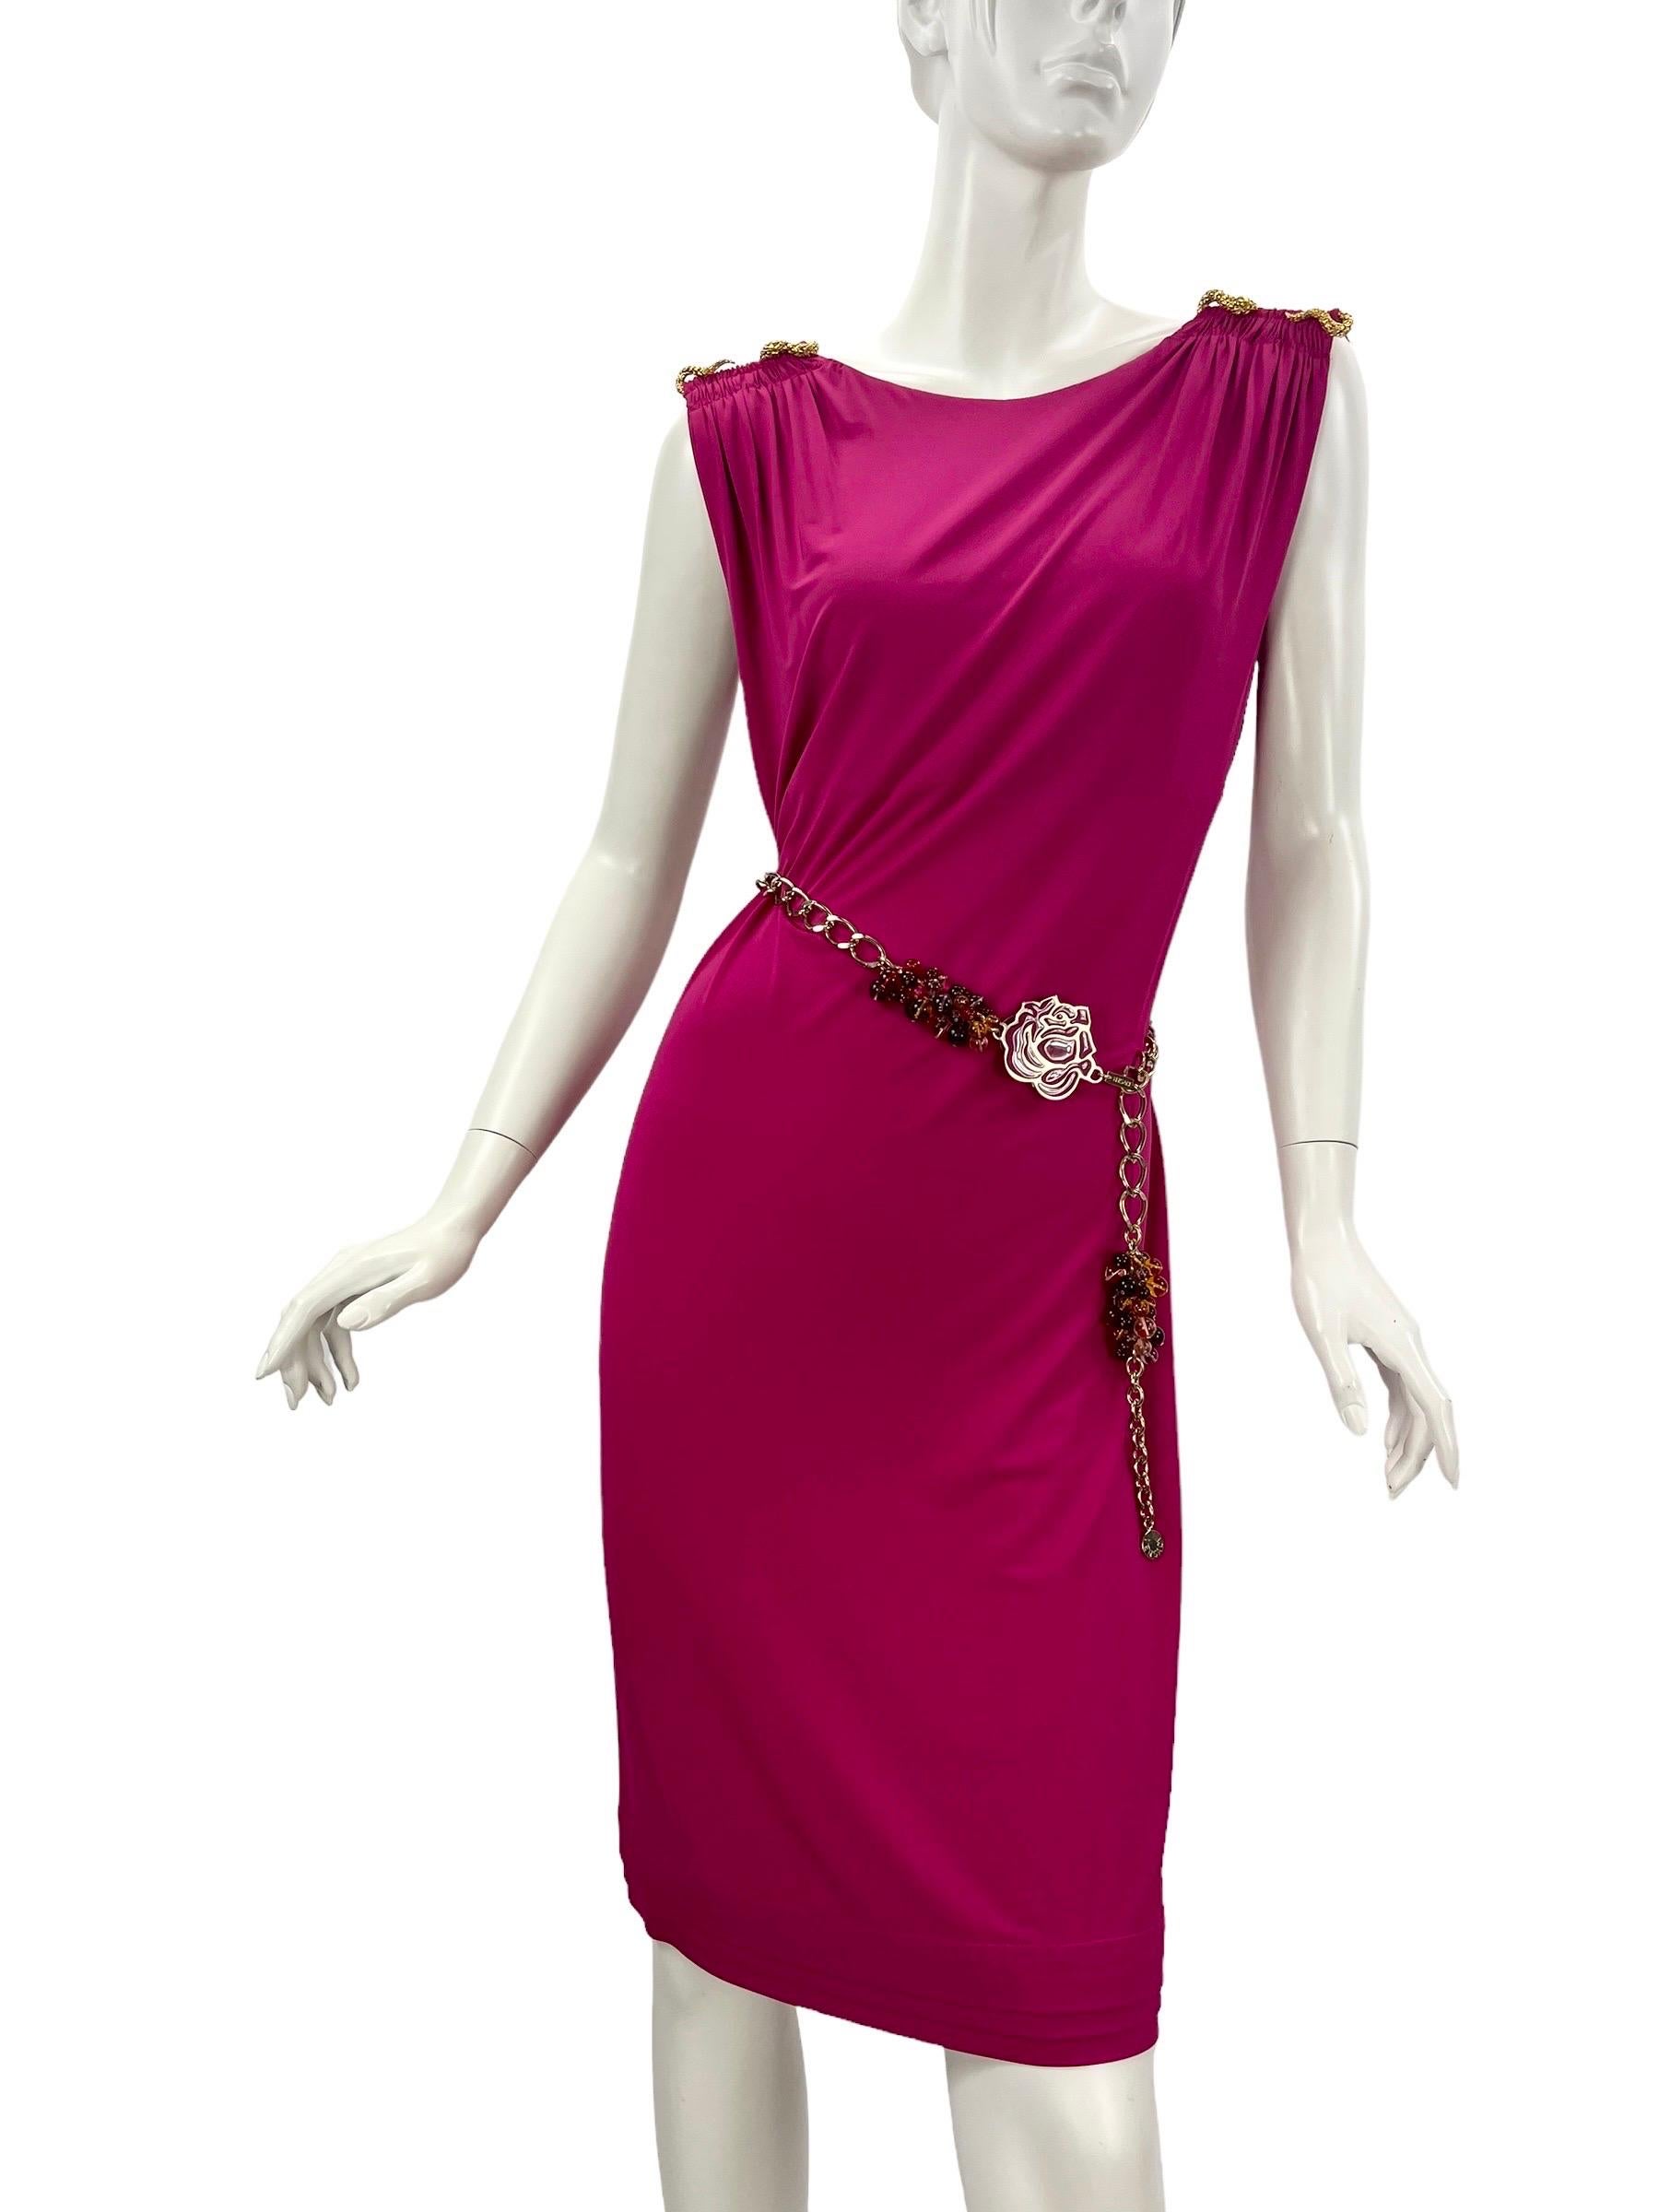 2005 Vintage Roberto Cavalli Fuchsia Pink Dress with Snake details Size 44 In New Condition For Sale In Montgomery, TX